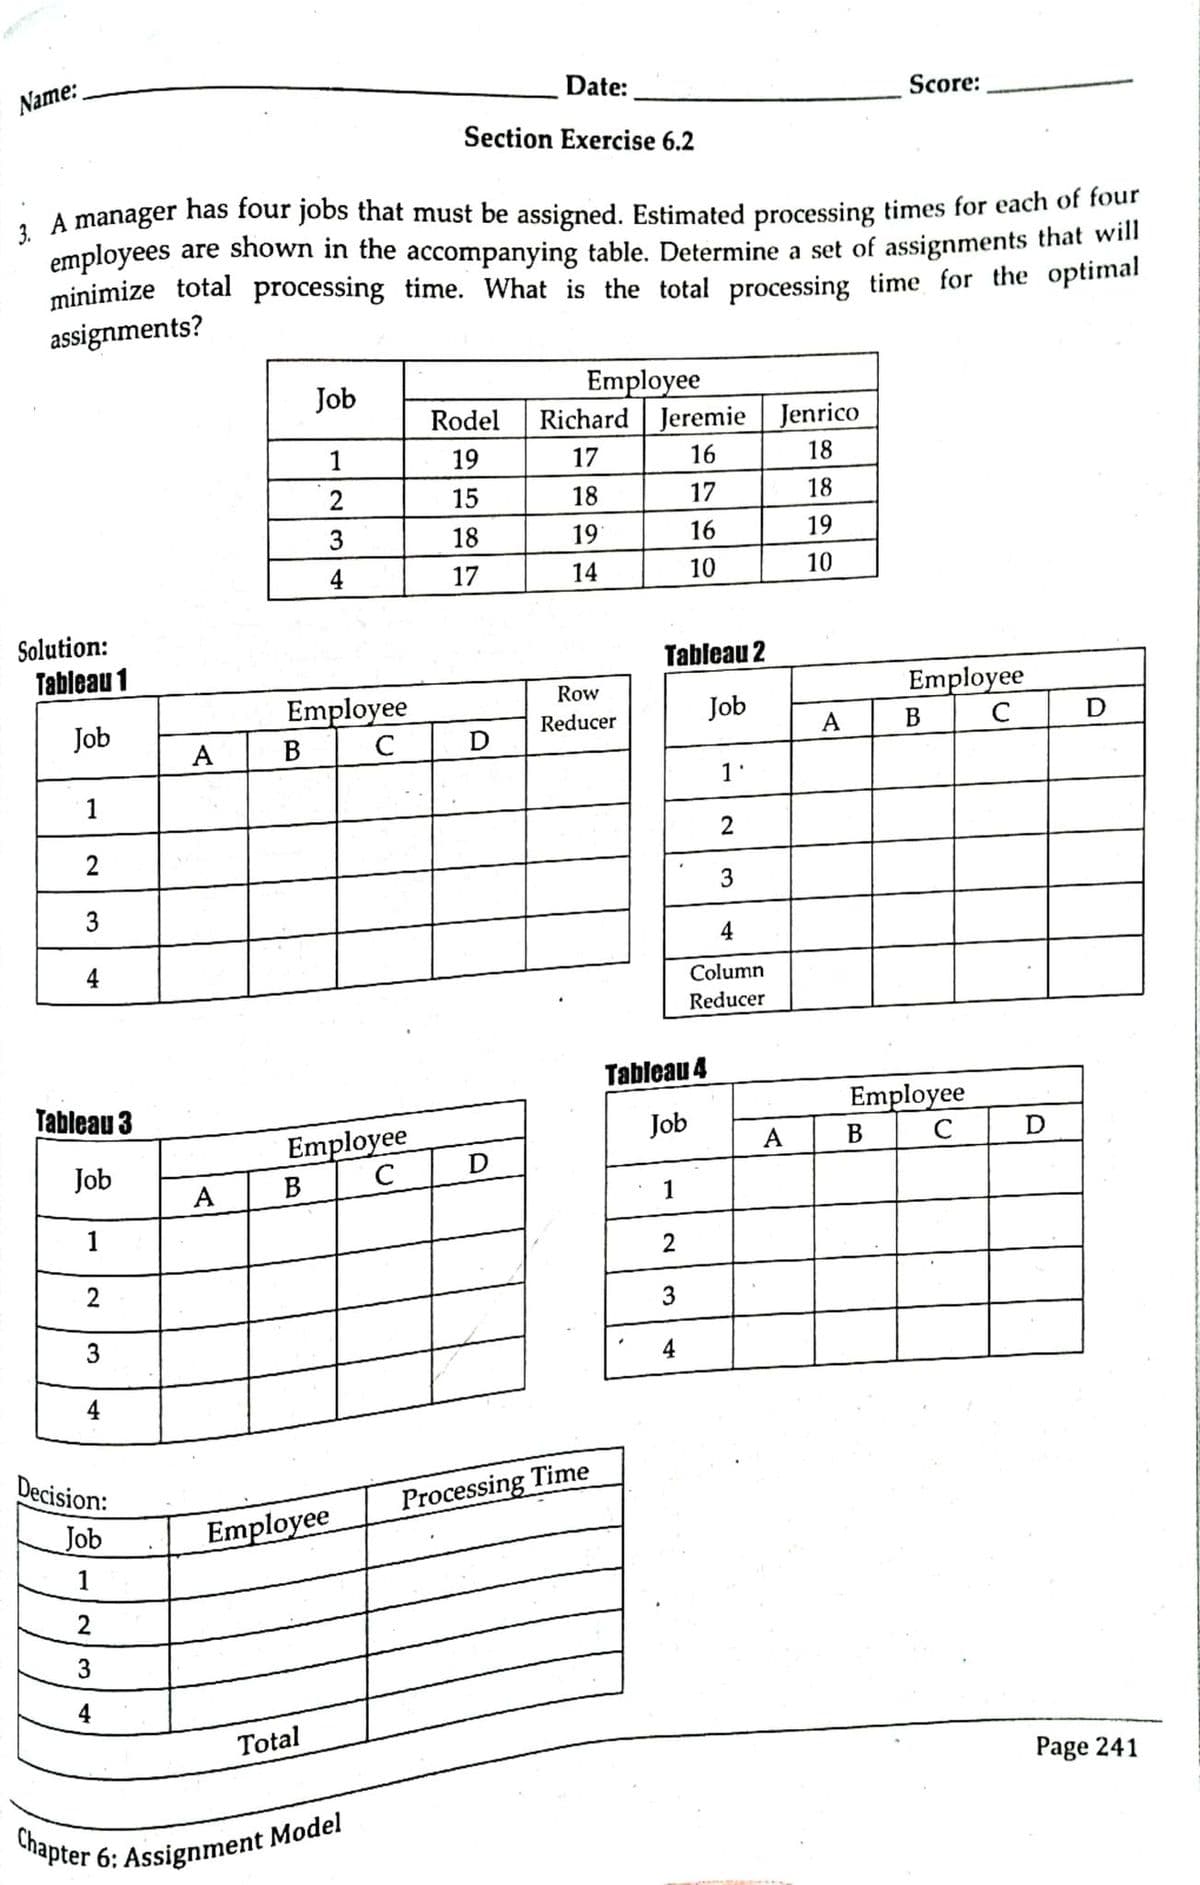 Chapter 6: Assignment Model
Name:
Date:
Score:
Section Exercise 6.2
, A manager has four jobs that must be assigned. Estimated processing times for each of four
employees
minimize total processing time. What is the total processing time for the optimal
are shown in the accompanying table. Determine a set of assignments that will
assignments?
Employee
Richard Jeremie Jenrico
Job
Rodel
1
19
17
16
18
2
15
18
17
18
3
18
19
16
19
4
17
14
10
10
Solution:
Tableau 1
Tableau 2
Employee
Row
Employee
Job
Job
Reducer
A
D
A
В
D
1'
1
2
3
3
4
4
Column
Reducer
Tableau 4
Tableau 3
Employee
D
Job
Employee
D
А
C
Job
A
В
1
1
2
2
3
3
4
4
Decision:
Processing Time
Job
1
Employee
4
Total
Page 241
